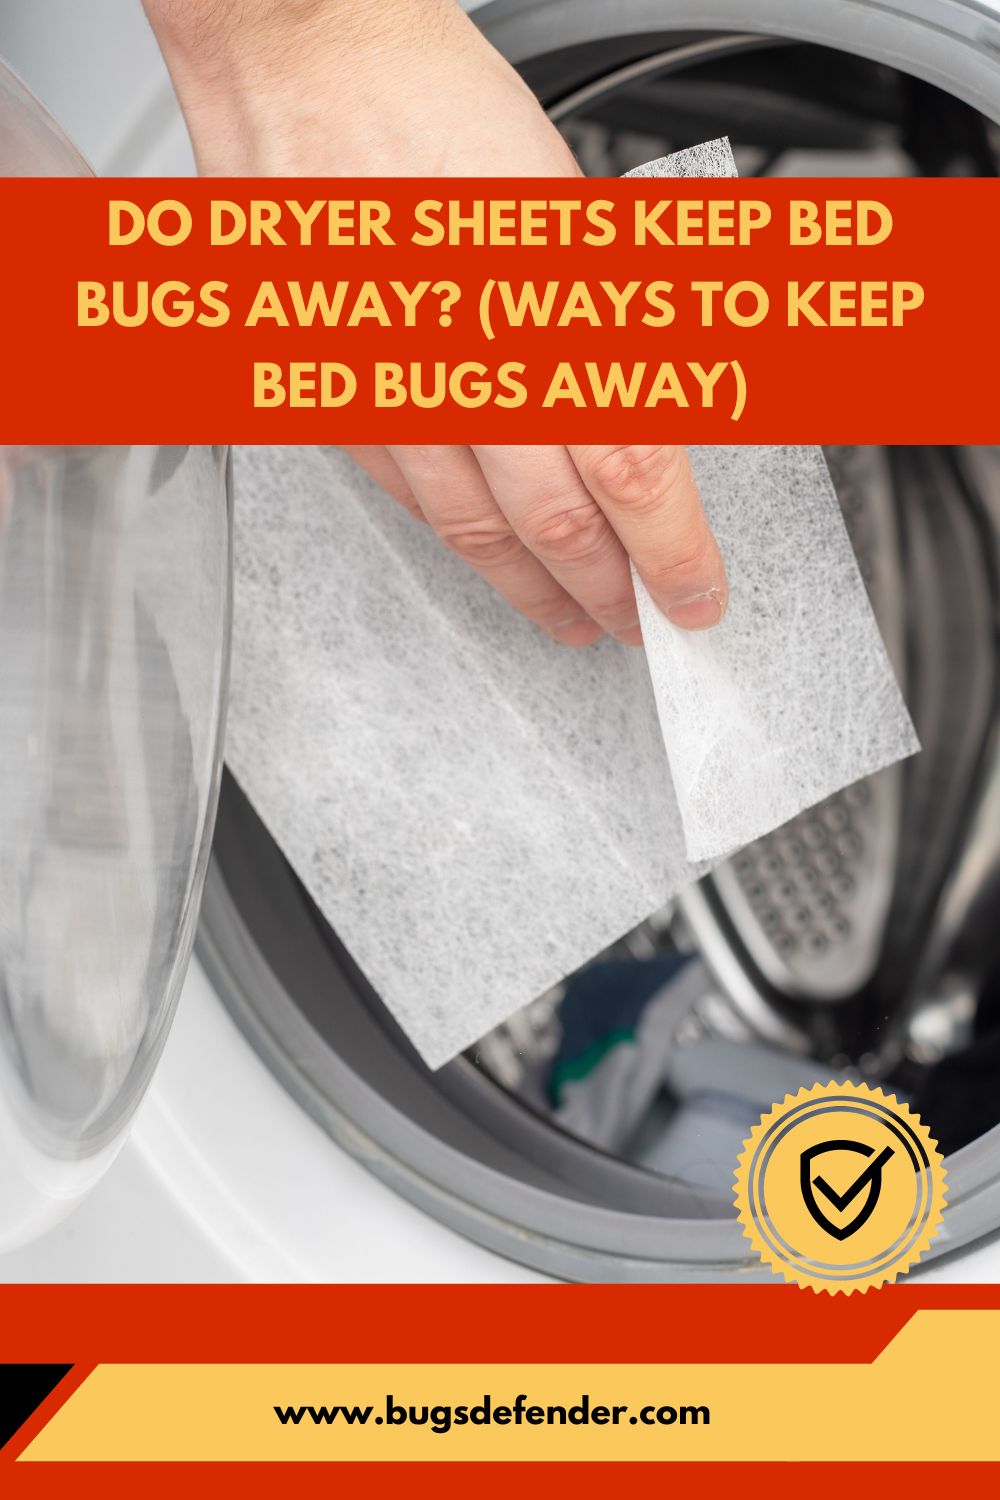 Do Dryer Sheets Keep Bed Bugs Away pin1